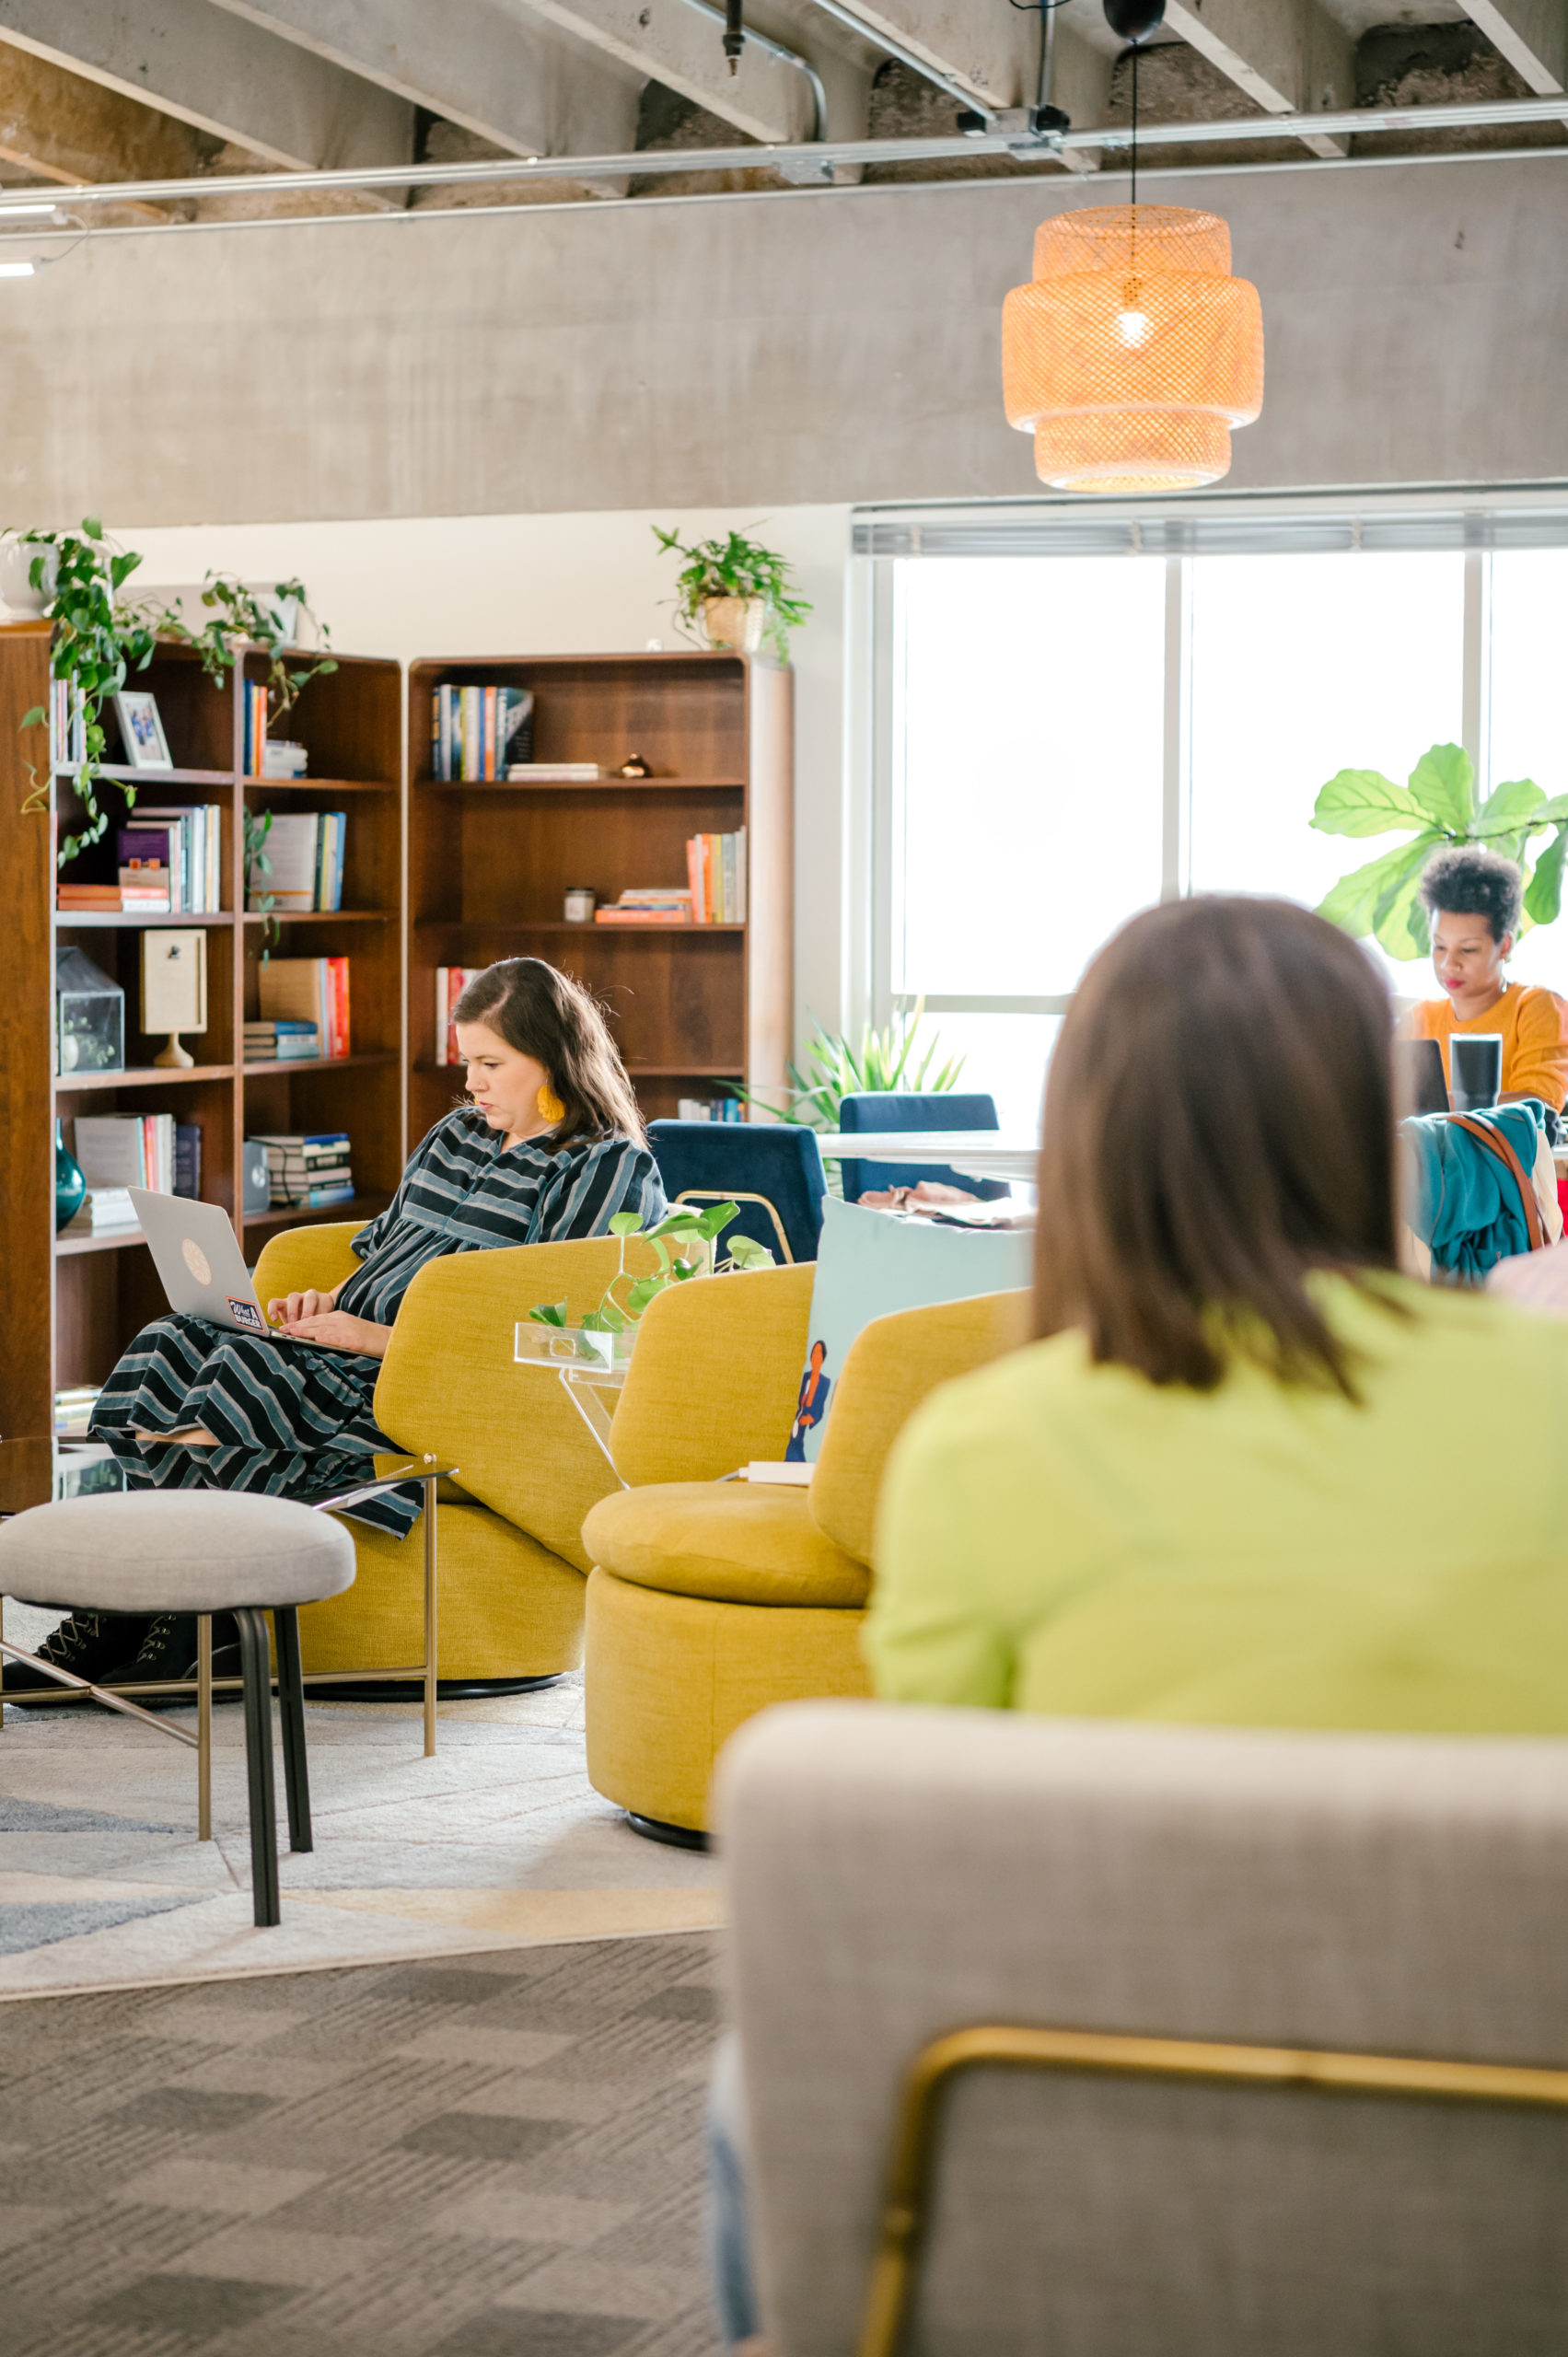 Photo of community workspace with women sitting in lounge chairs working on the computer